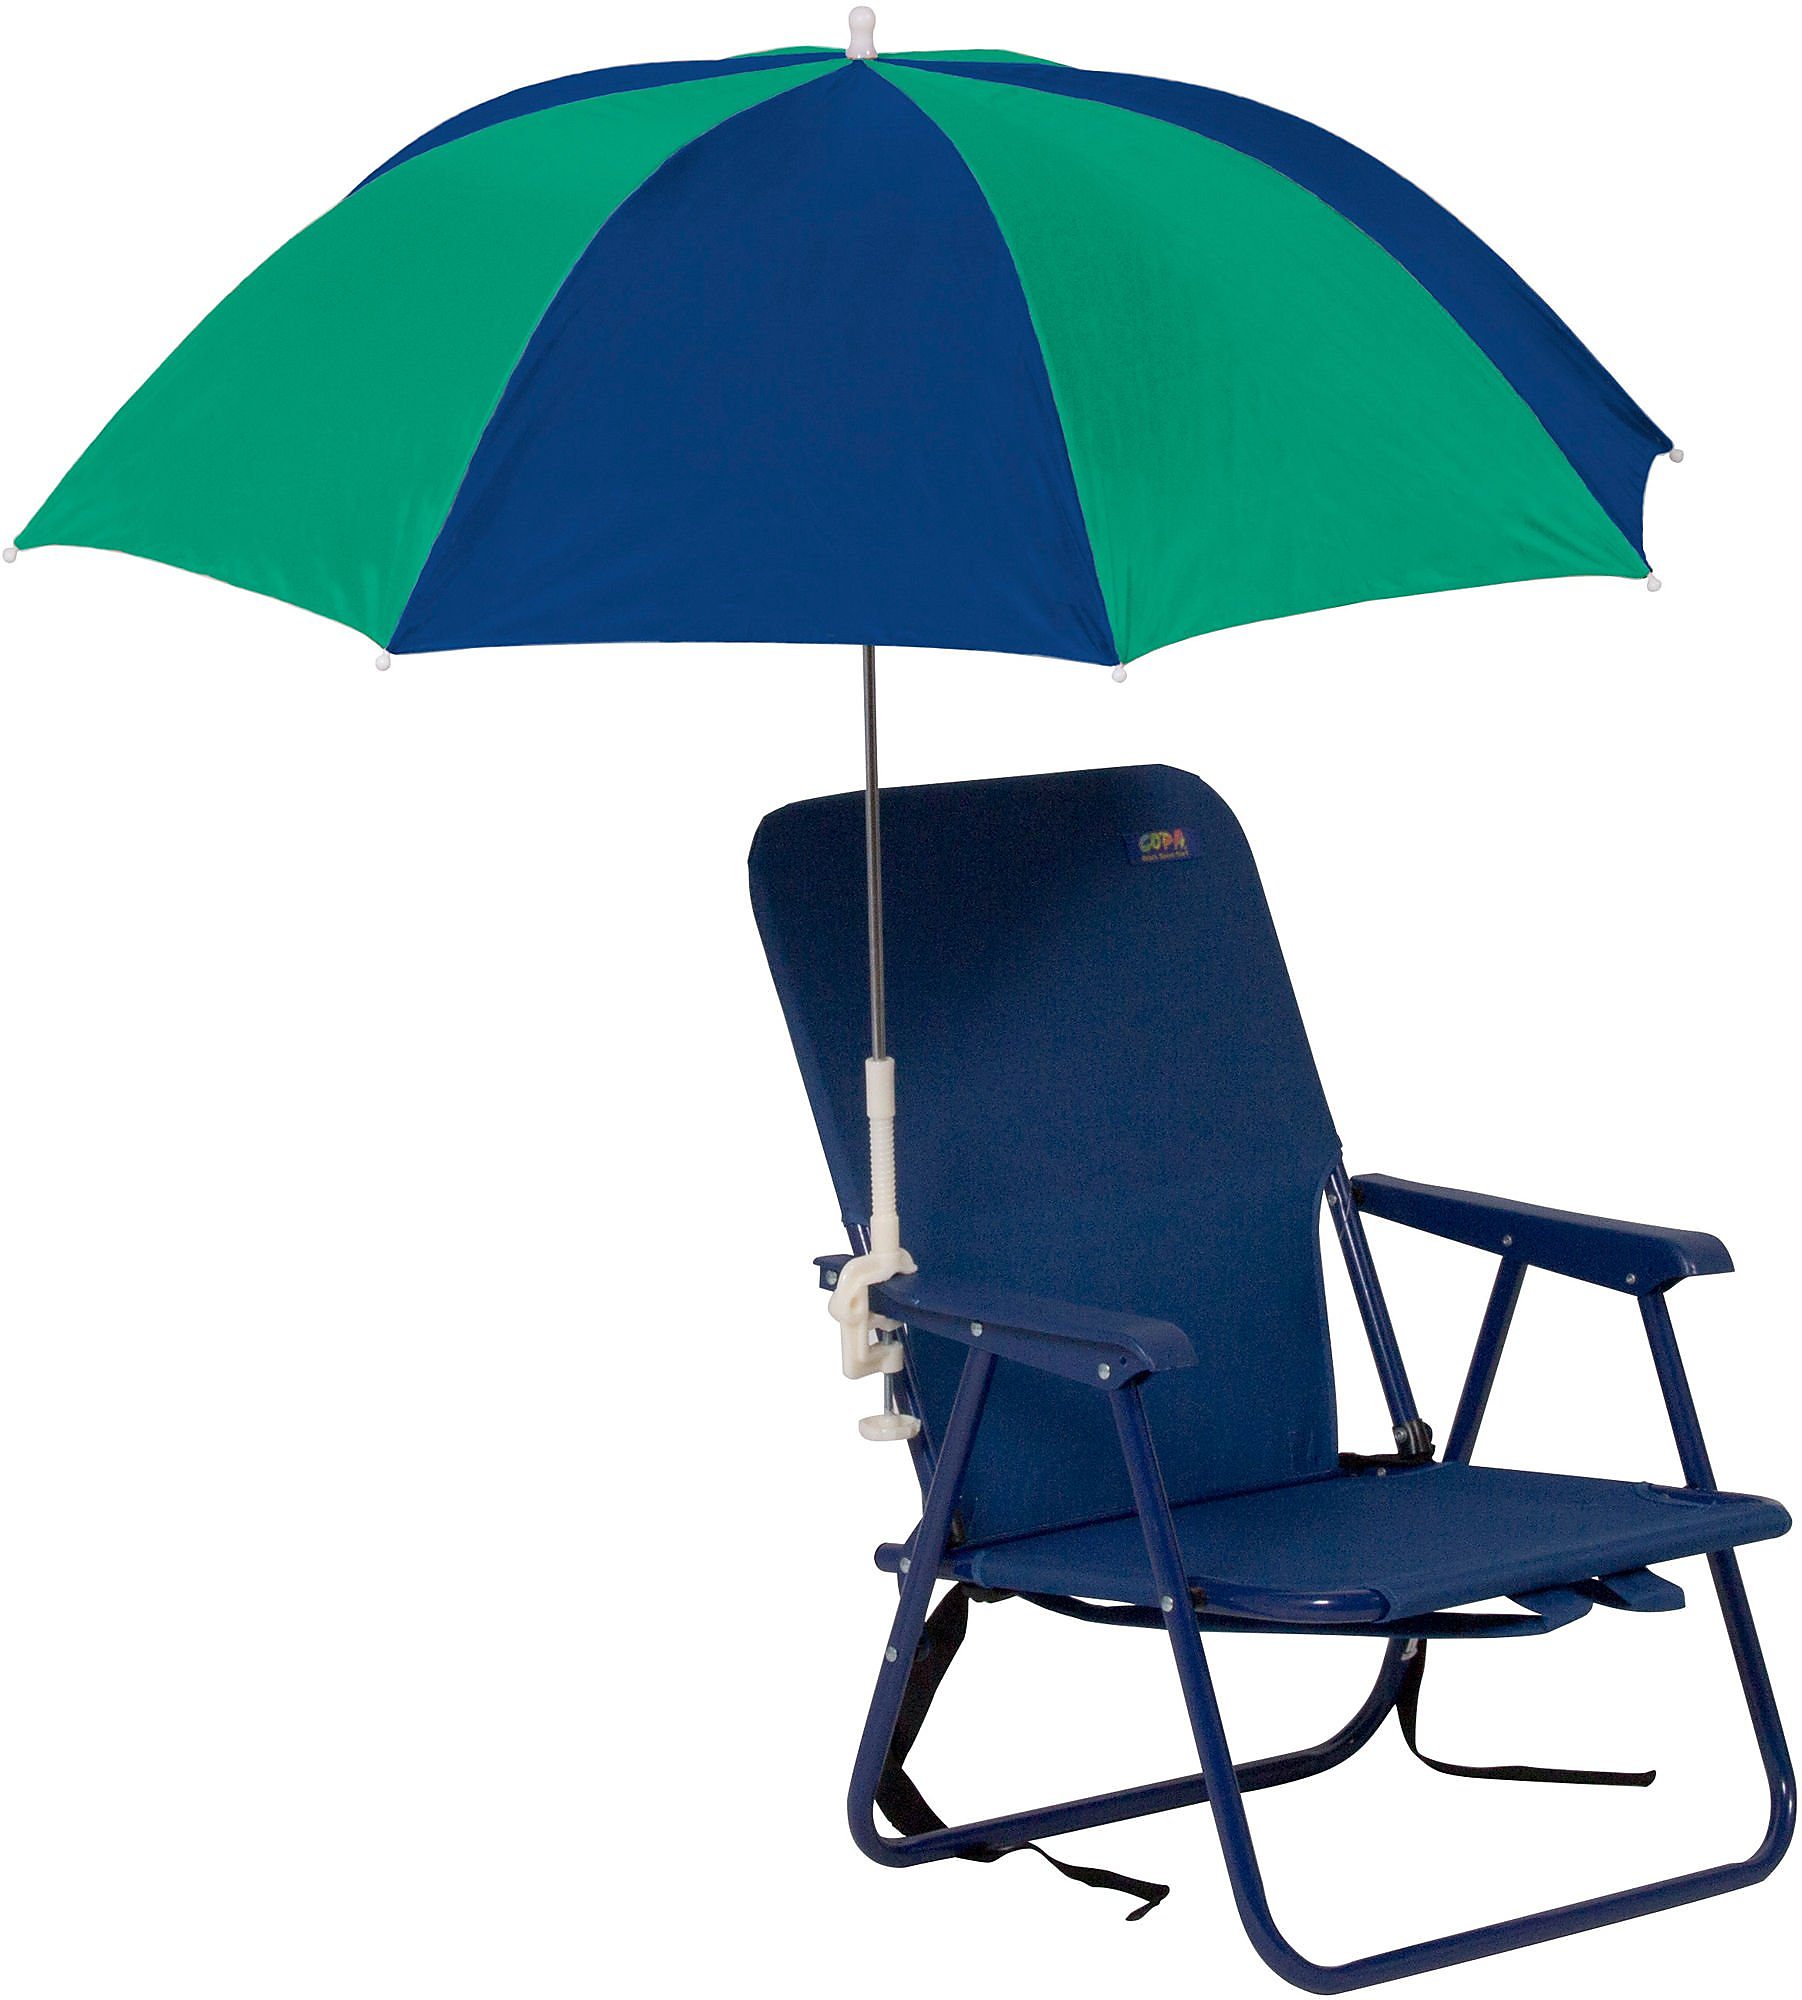 Creatice Clamp On Umbrella For Beach Chair for Small Space